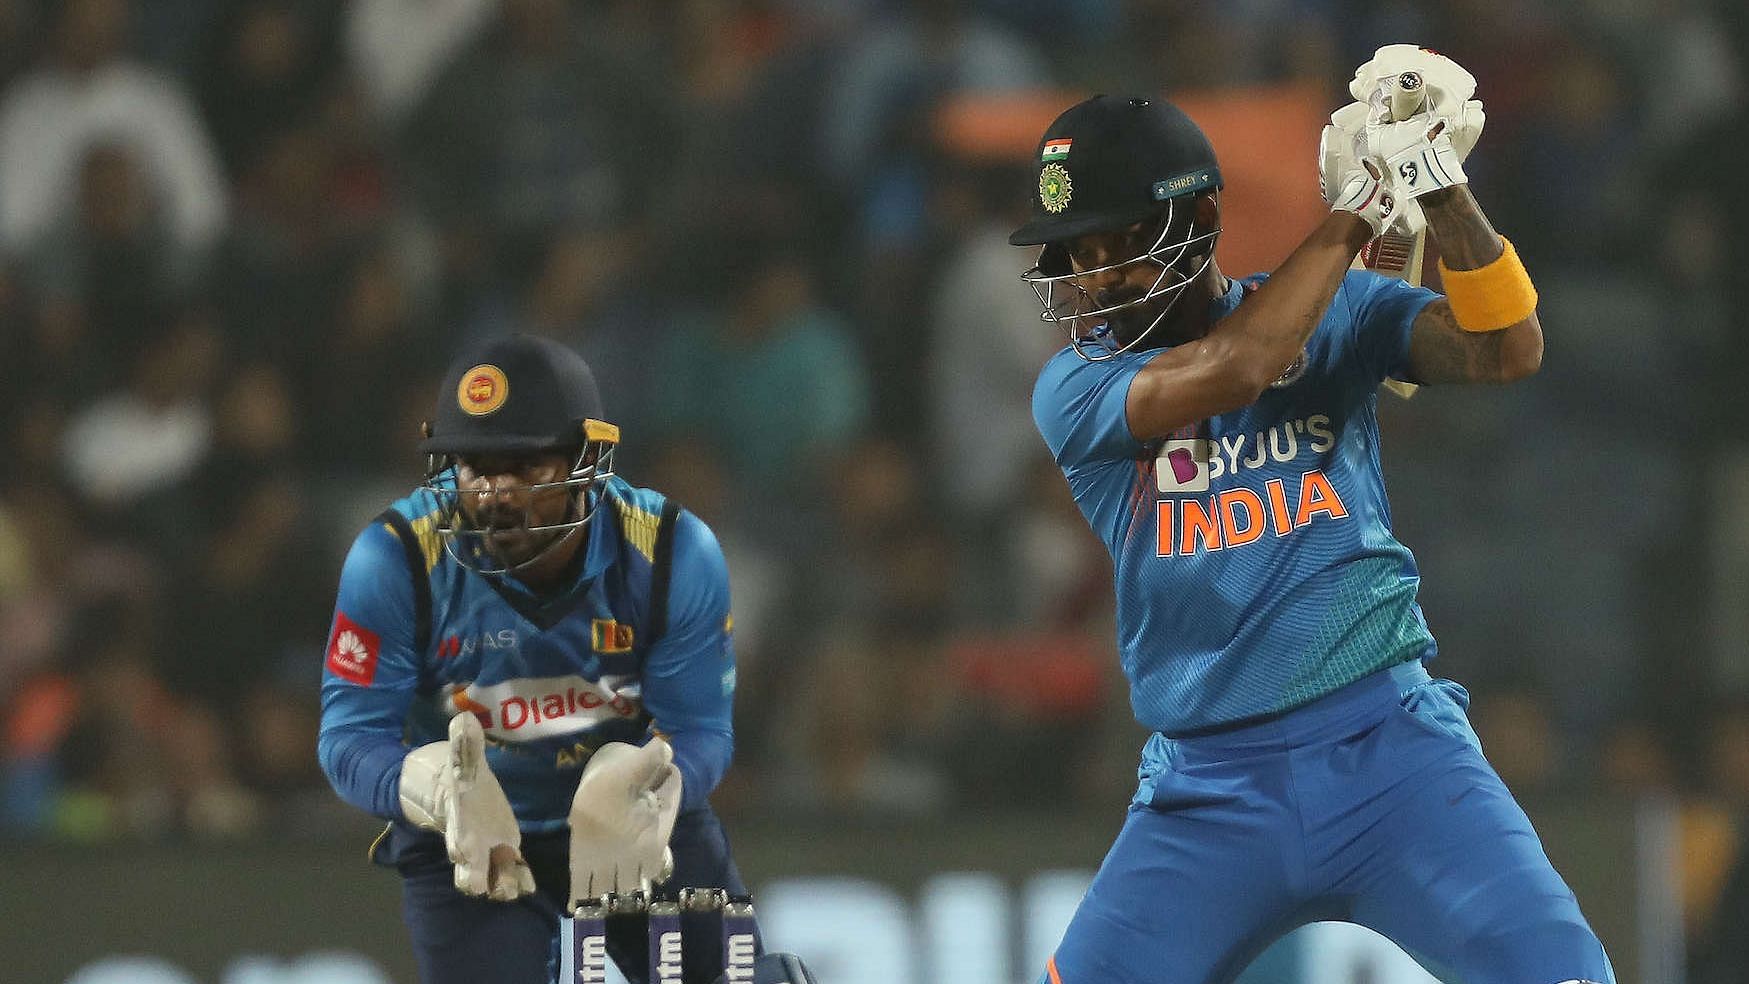 KL Rahul (right) was the highest run-getter in the three-match T20I series socring 99 runs in two innings.